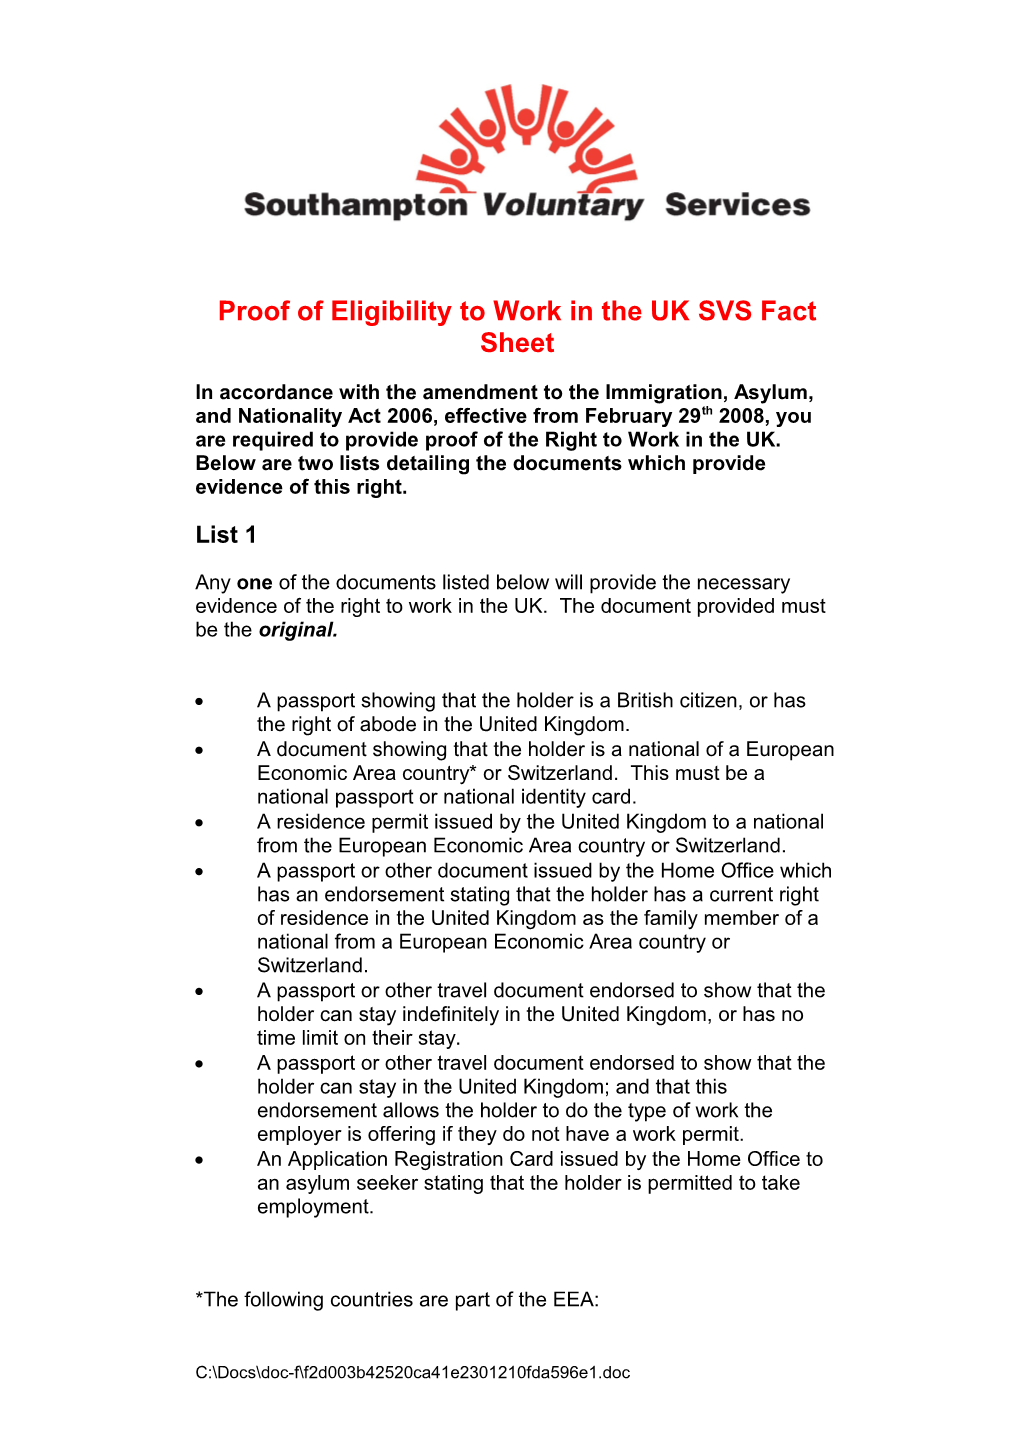 Proof of Eligibility to Work in the UKSVS Fact Sheet